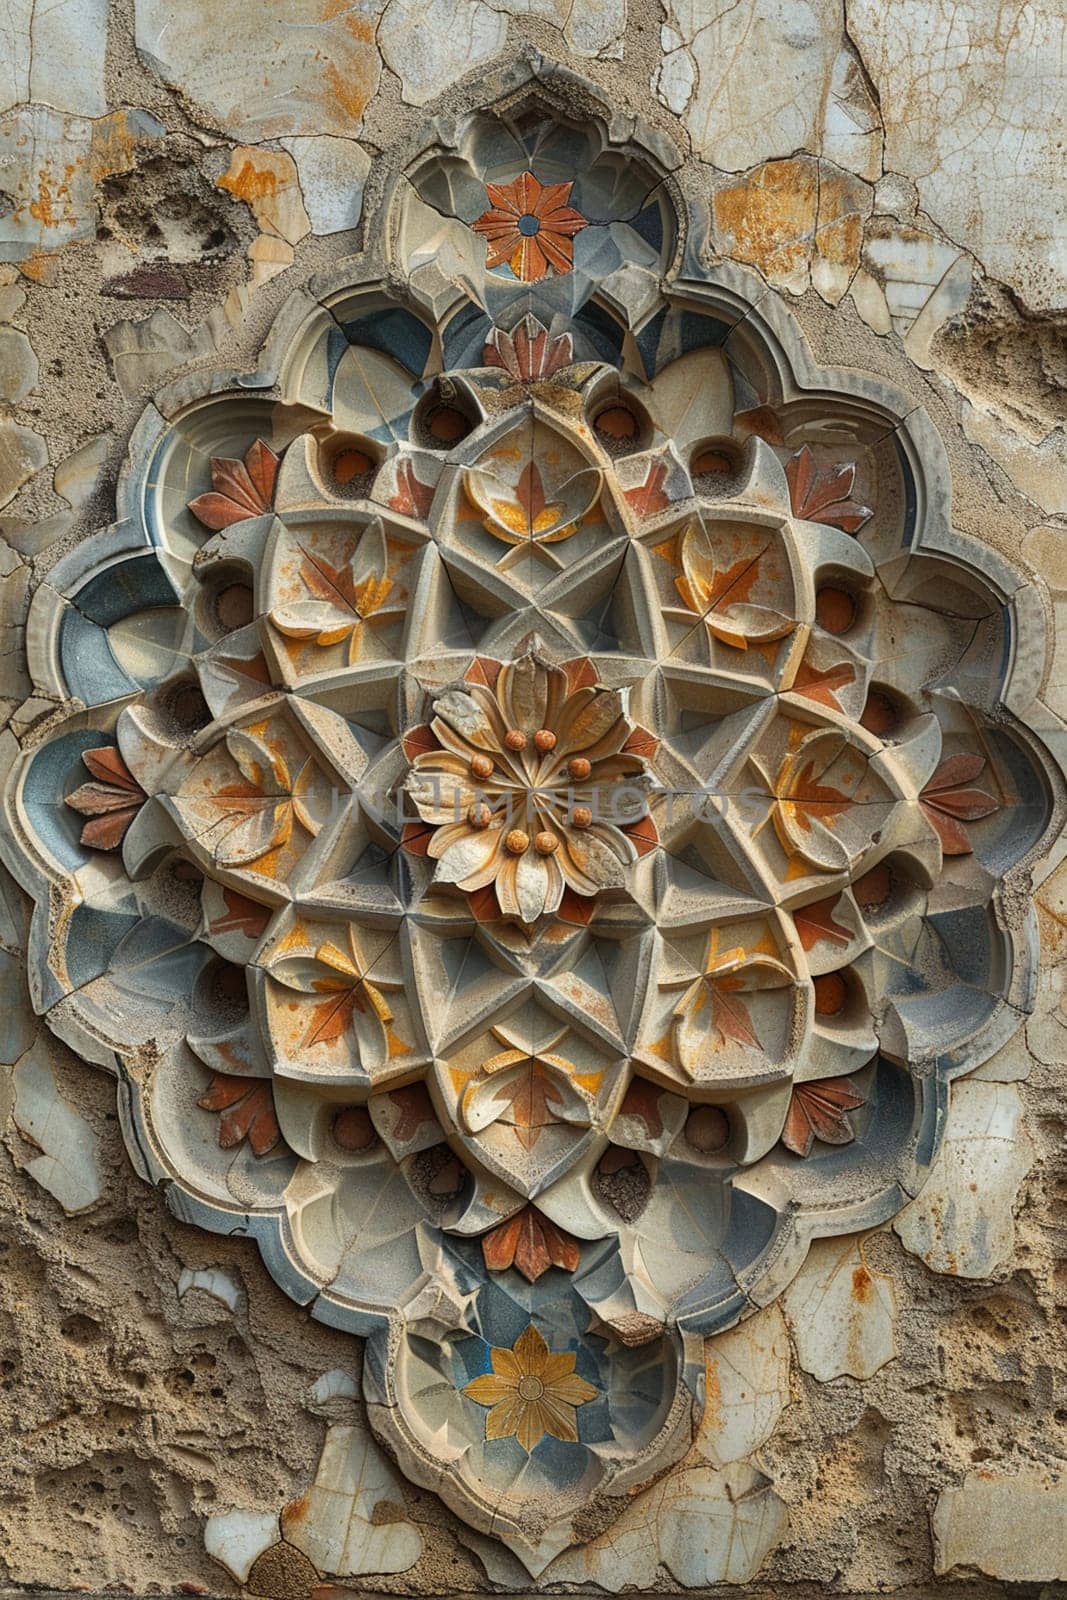 Islamic Geometric Patterns Cascading Across a Mosque Wall by Benzoix